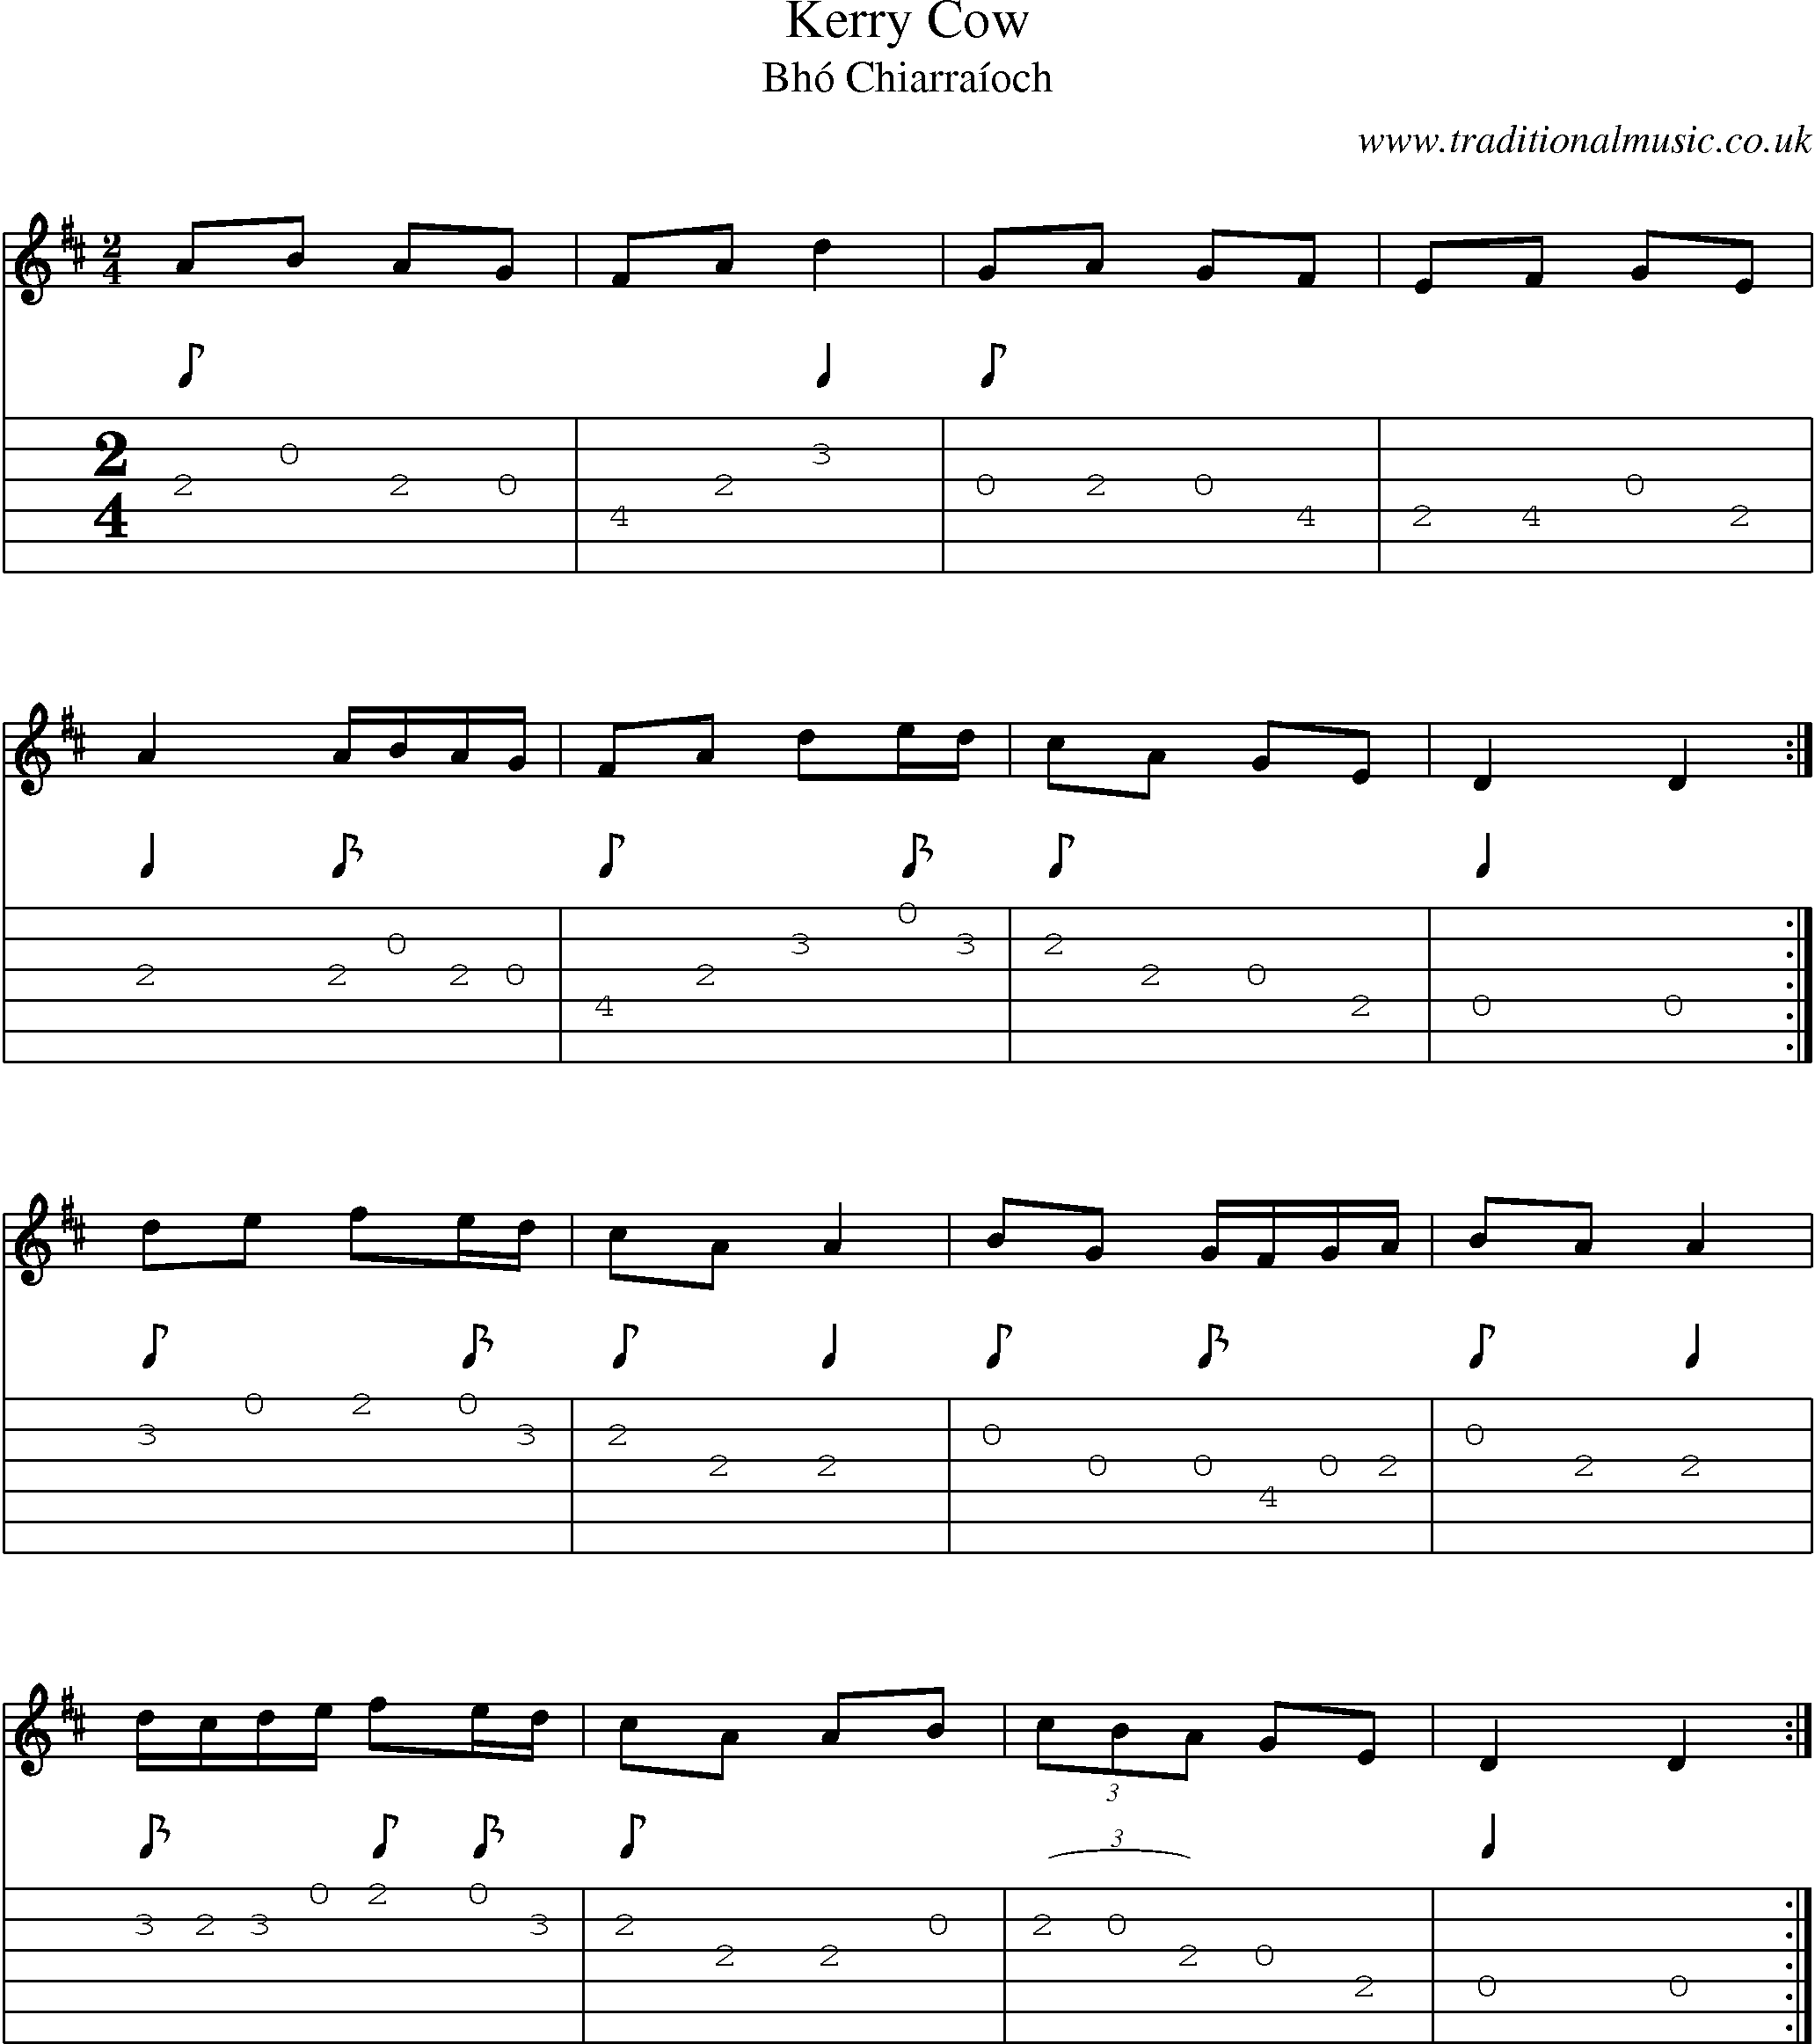 Music Score and Guitar Tabs for Kerry Cow